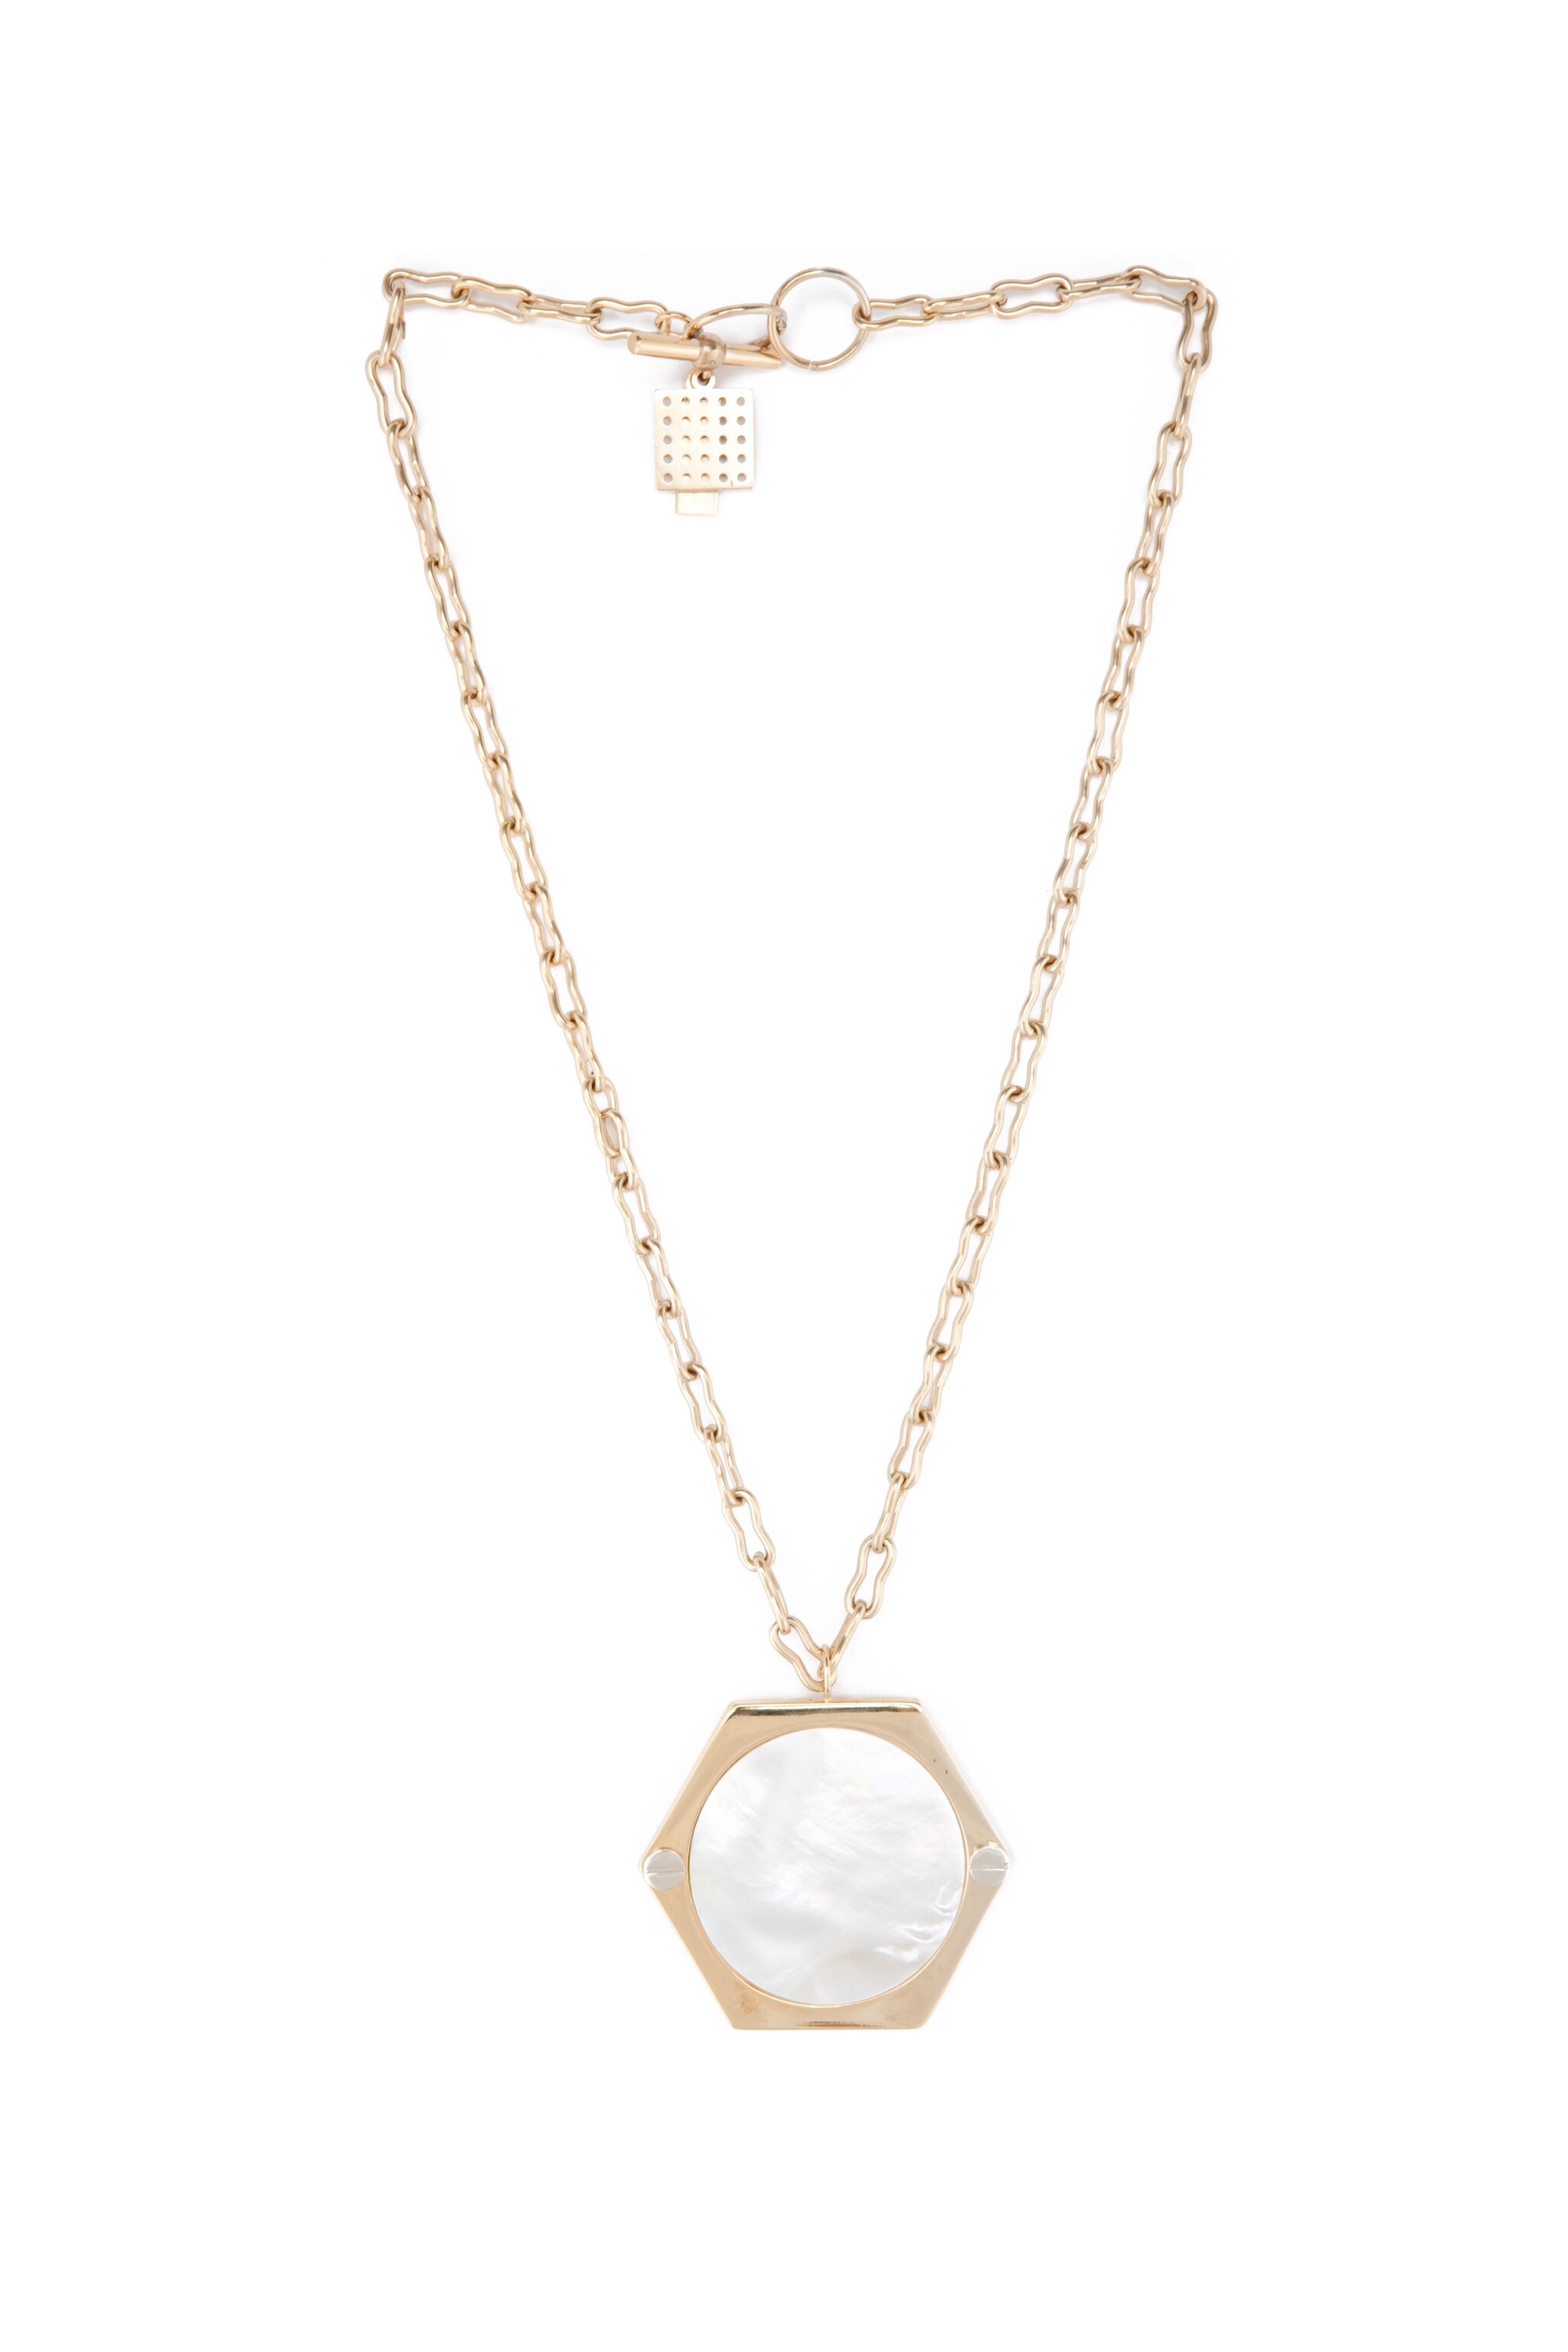 Image 1 of Kelly Wearstler Spyglass Necklace in Mother of Pearl